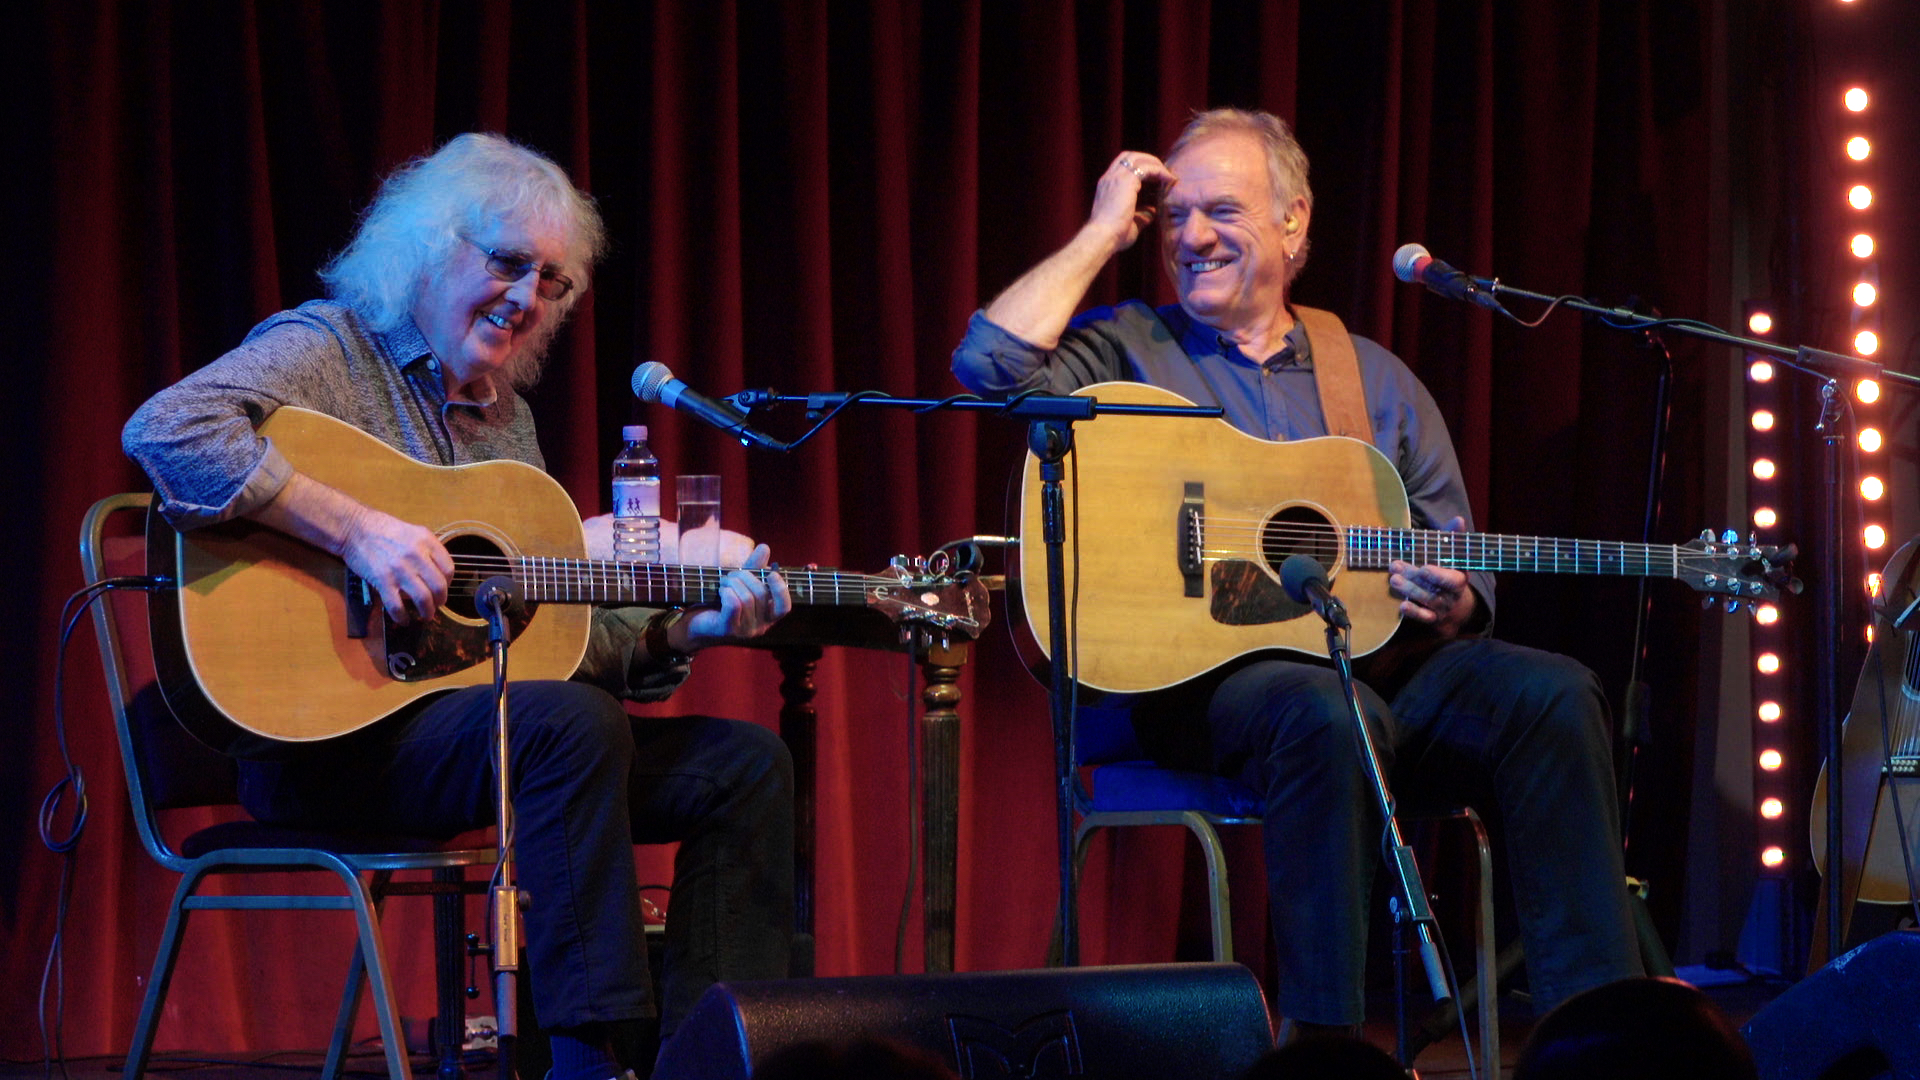 Wizz Jones and Ralph McTell Come To Backstage Kinross